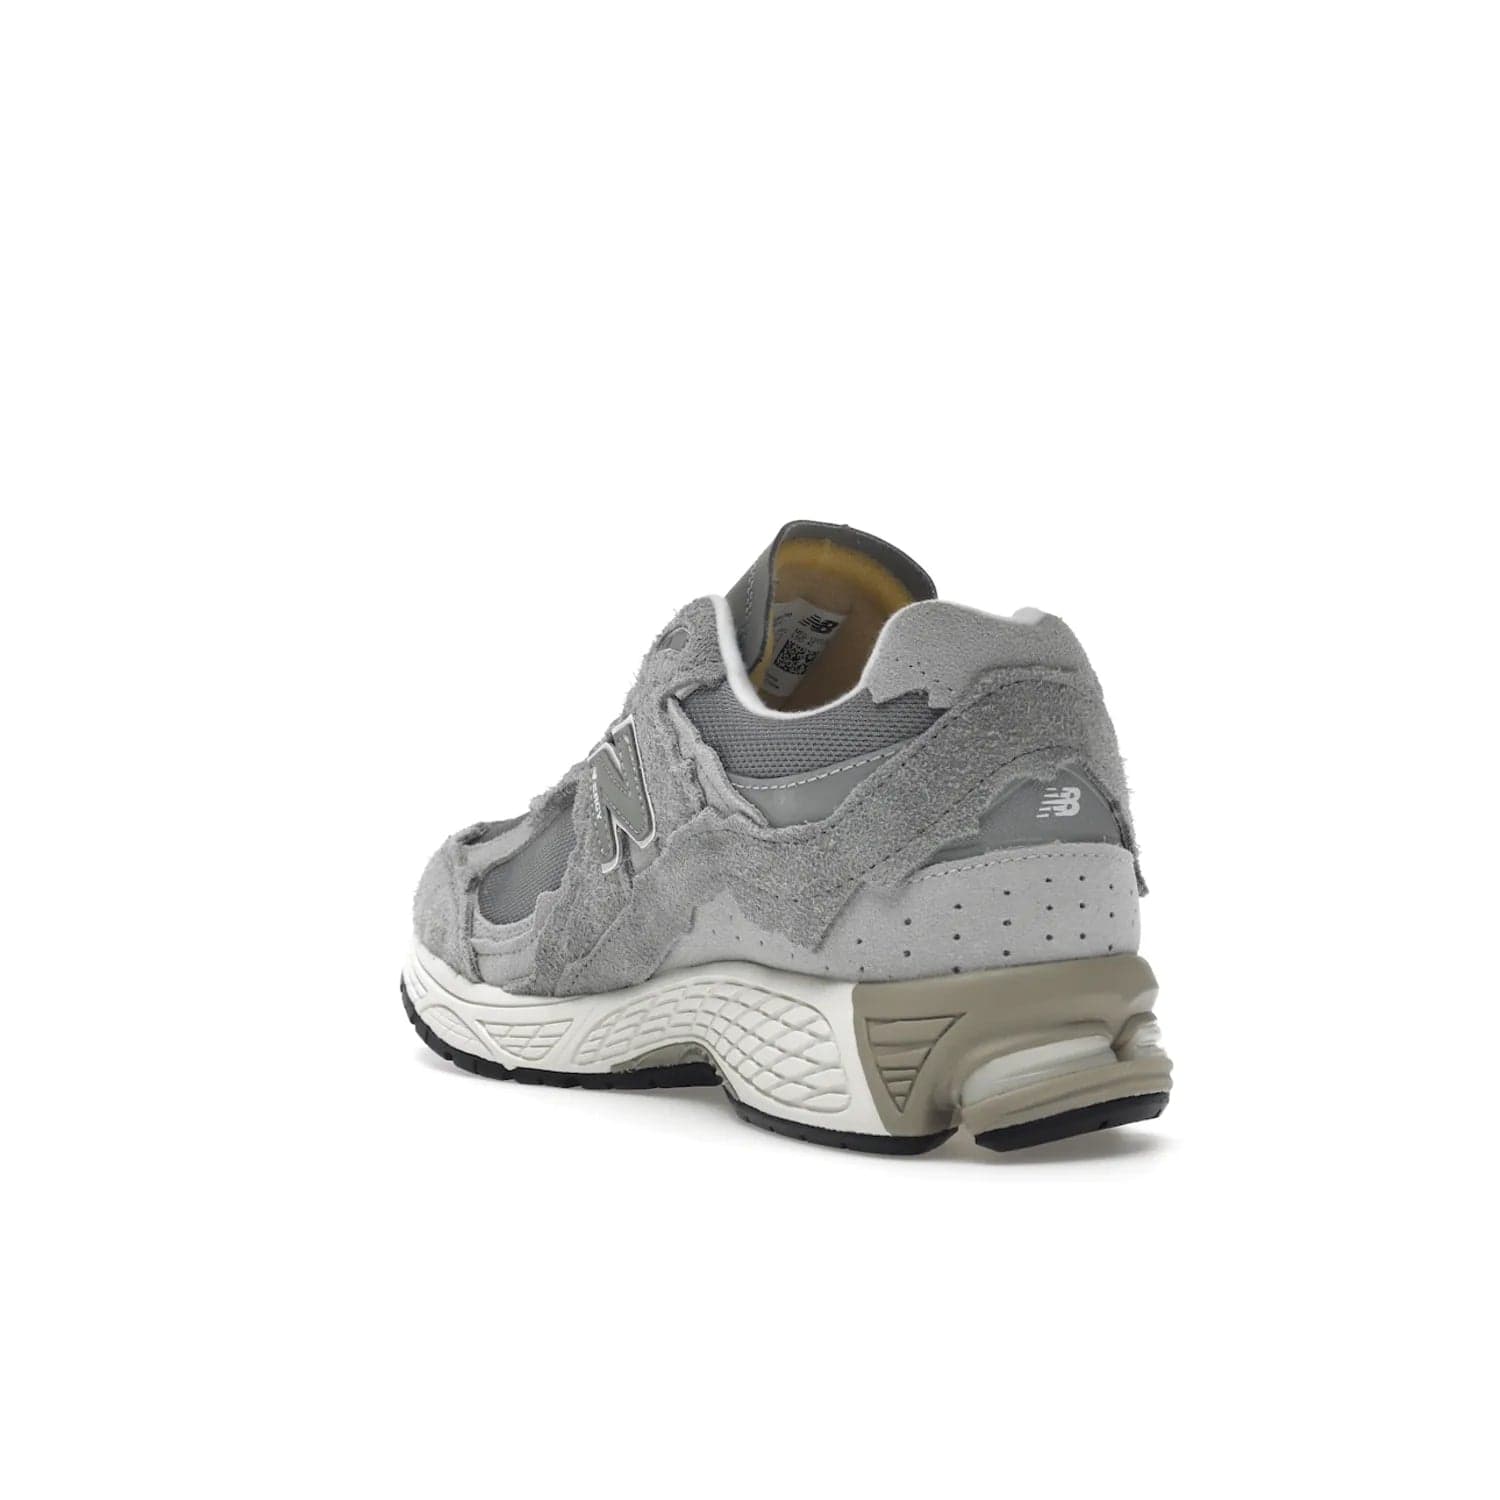 New Balance 2002R Protection Pack Grey - Image 25 - Only at www.BallersClubKickz.com - The New Balance 2002R Protection Pack Grey provides superior protection and all-day comfort. It features a blend of synthetic and mesh materials, foam midsole, rubber outsole, and a toe cap and heel counter. Show off the classic "N" logo and "2002R" lettering. Get a pair on February 14, 2023 for protection and style.